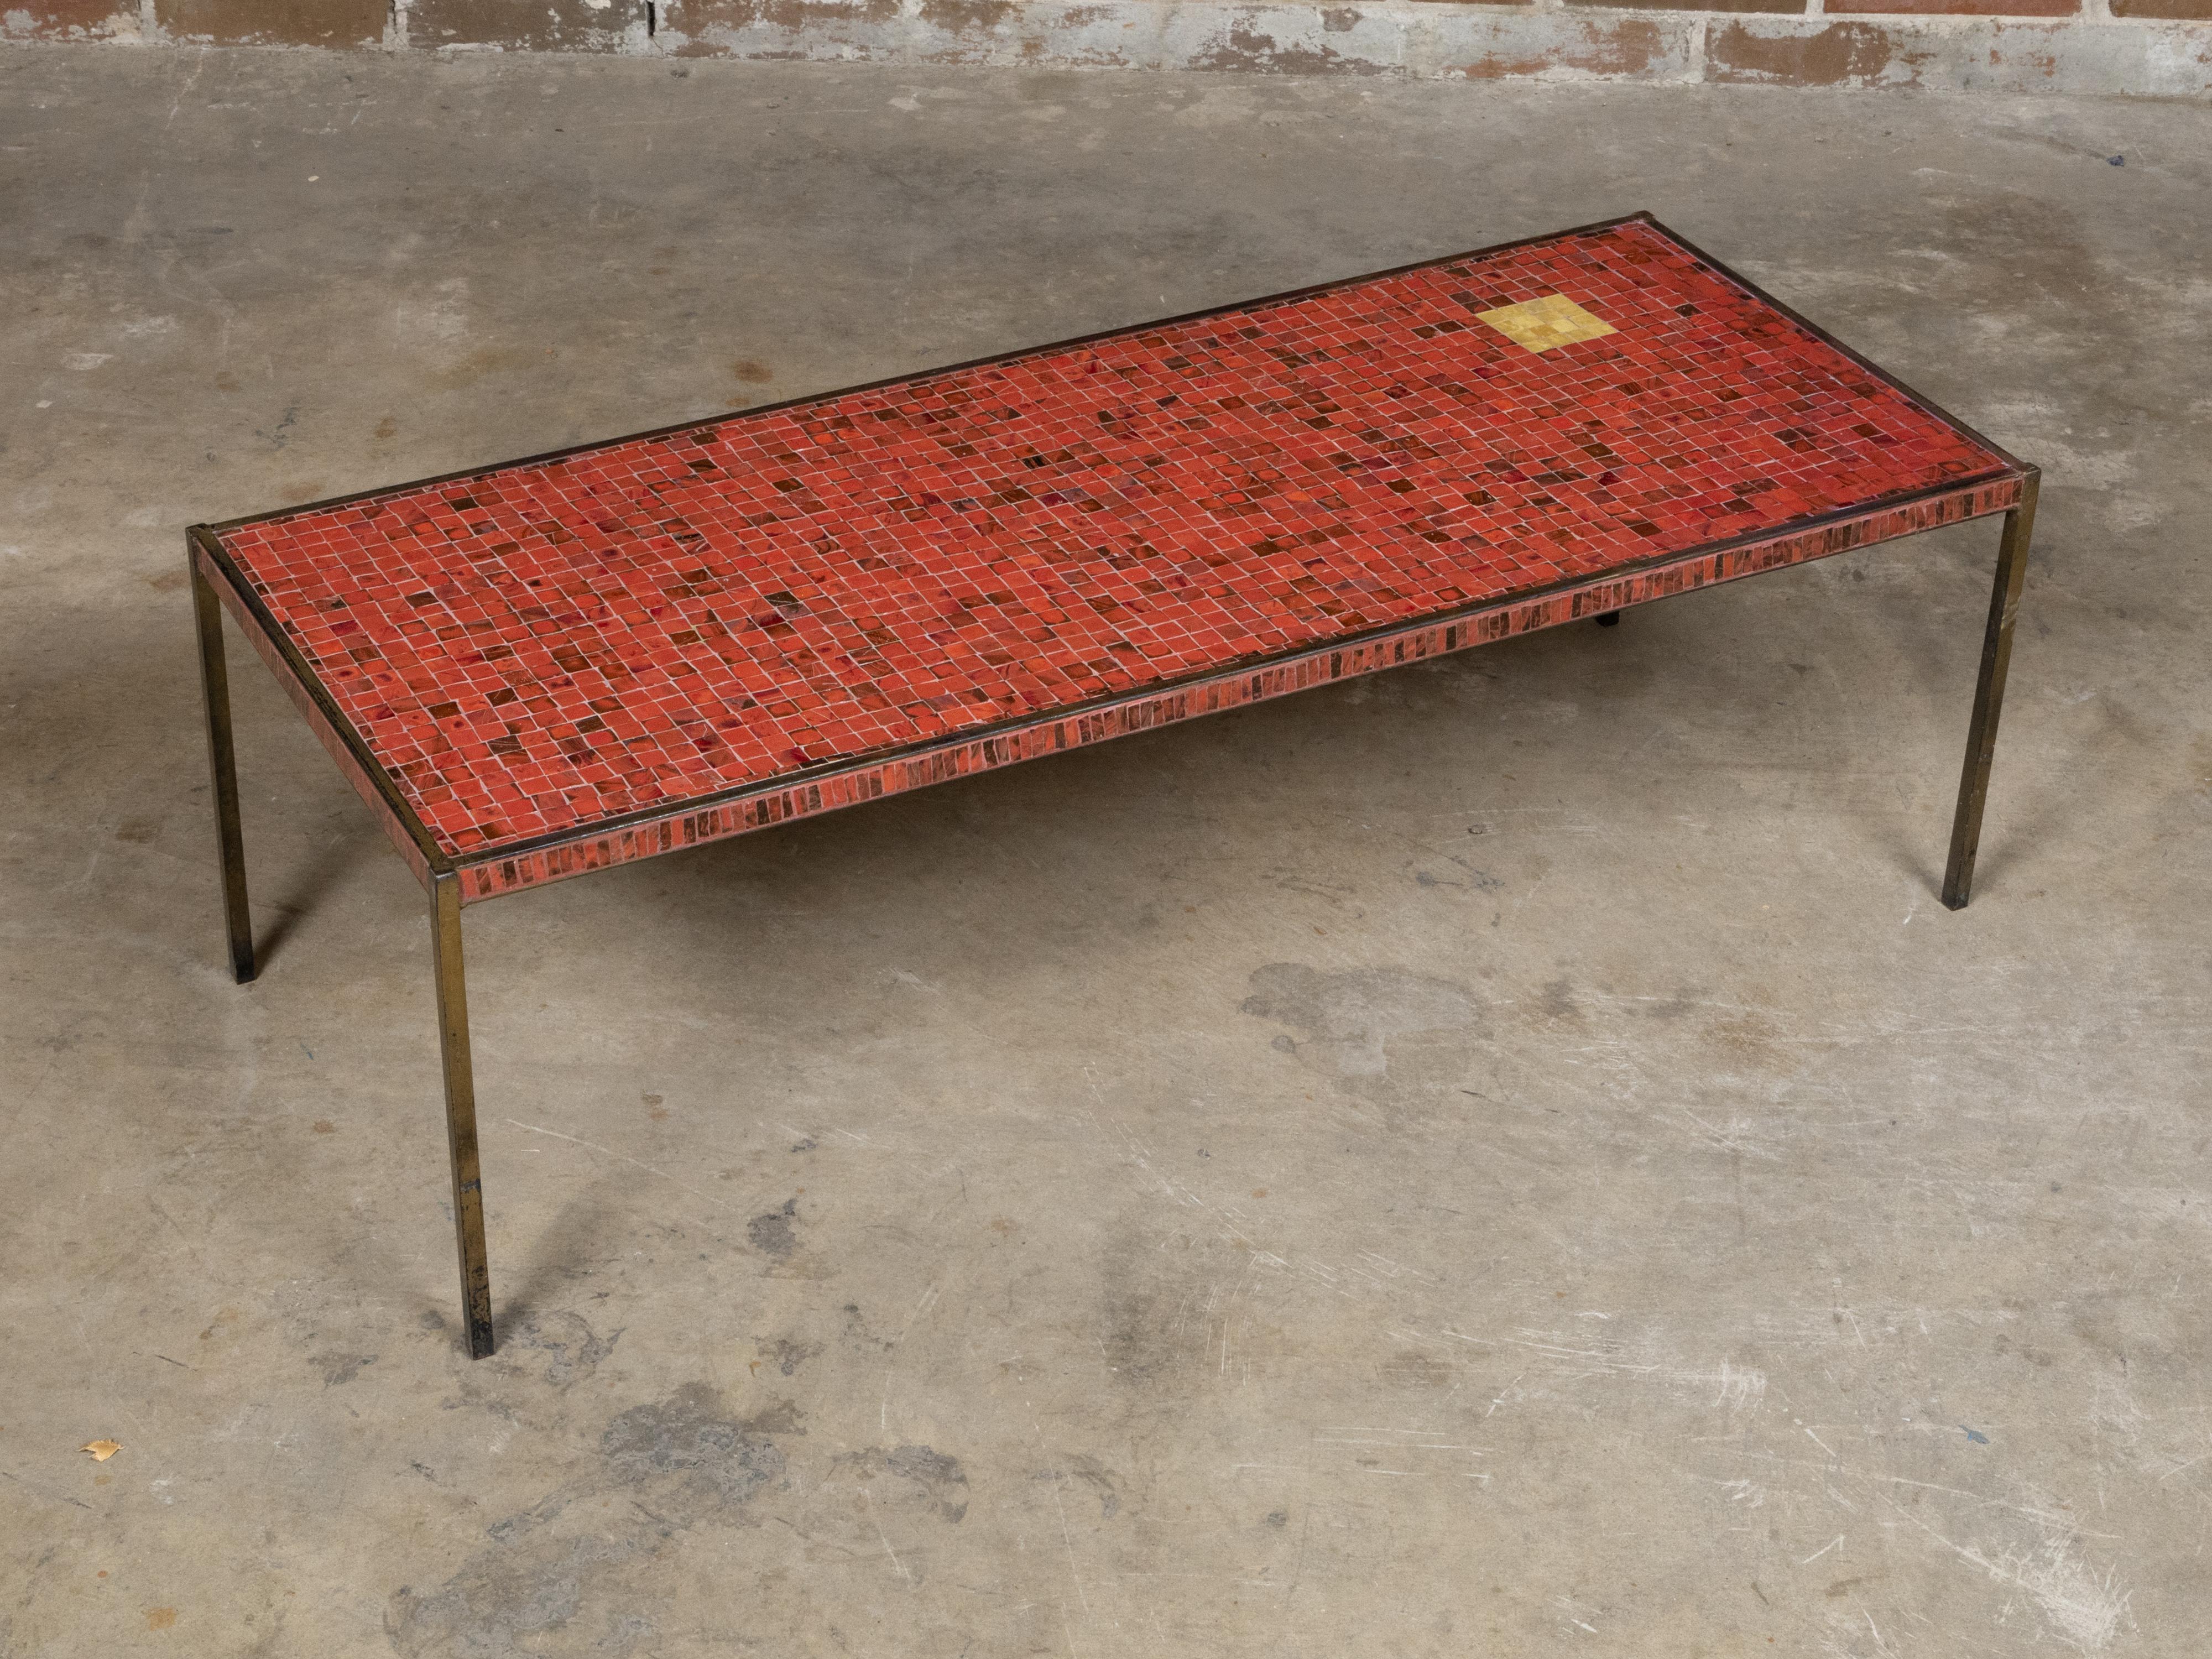 Midcentury Italian Mosaic Table with Iron Base and Red Glass Tile Style Top In Good Condition For Sale In Atlanta, GA